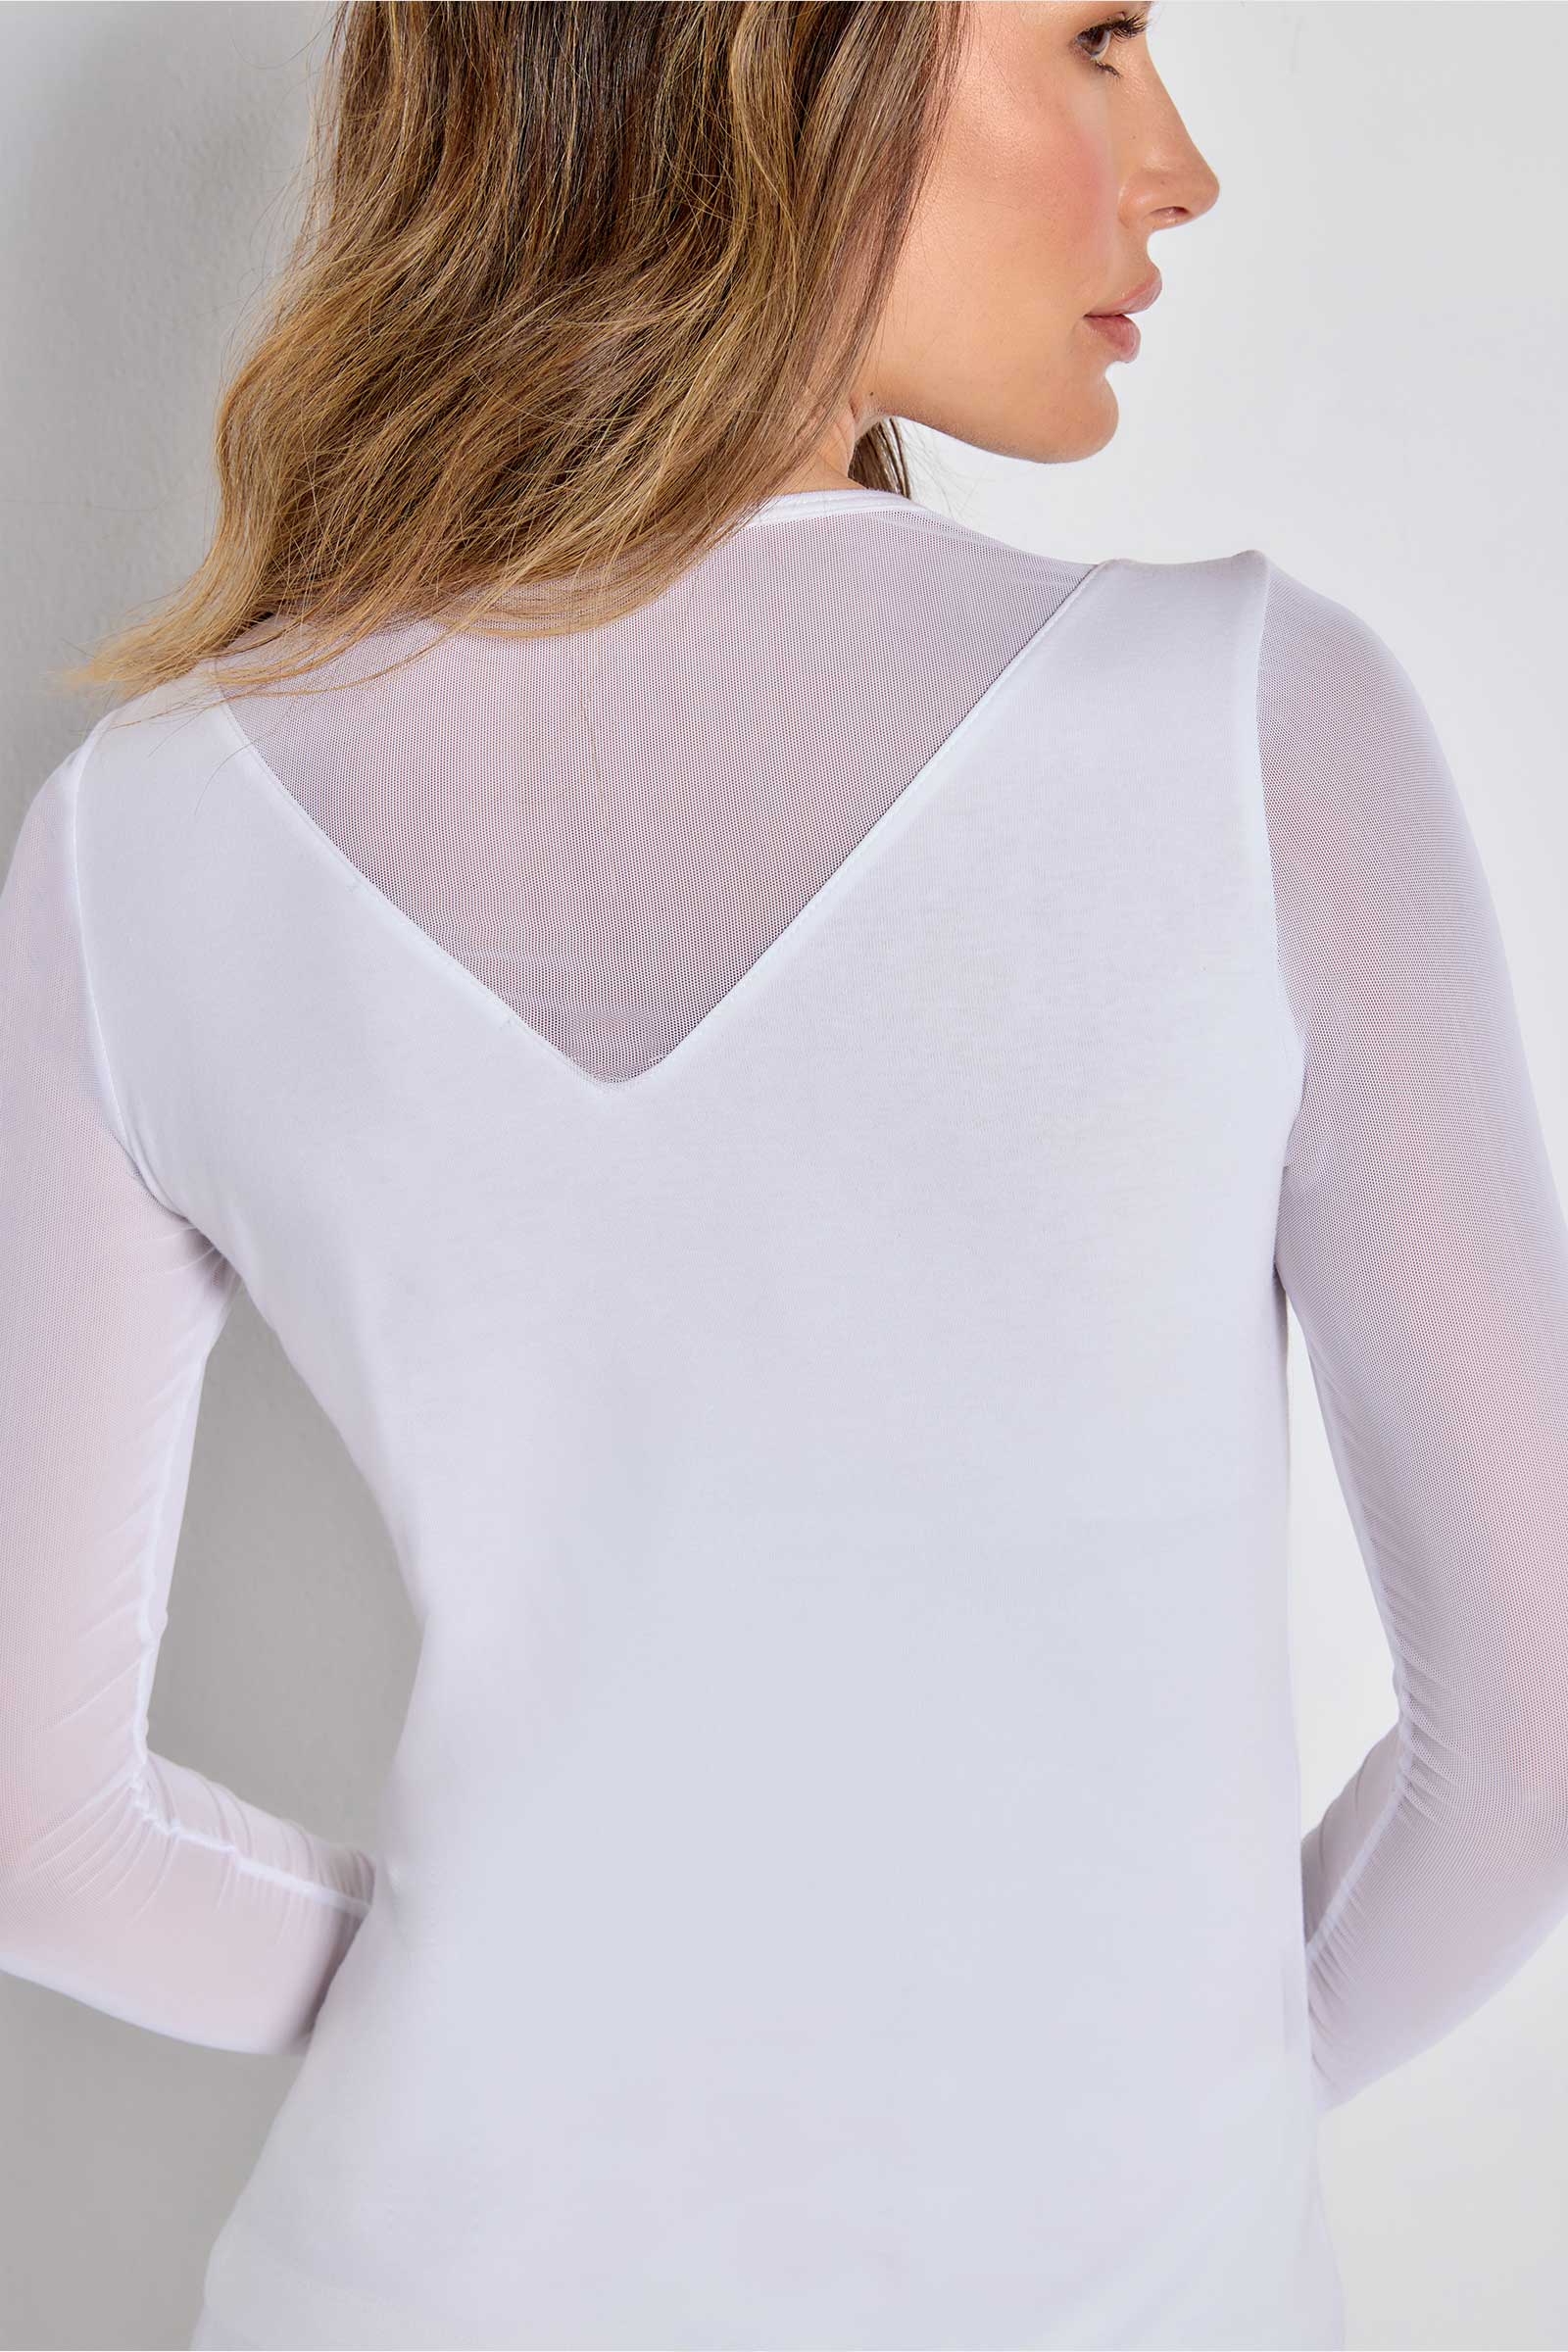 The Best Travel Top. Woman Showing the Back Detail of a Kim Mesh-Sleeve Top in Pima Modal in White.